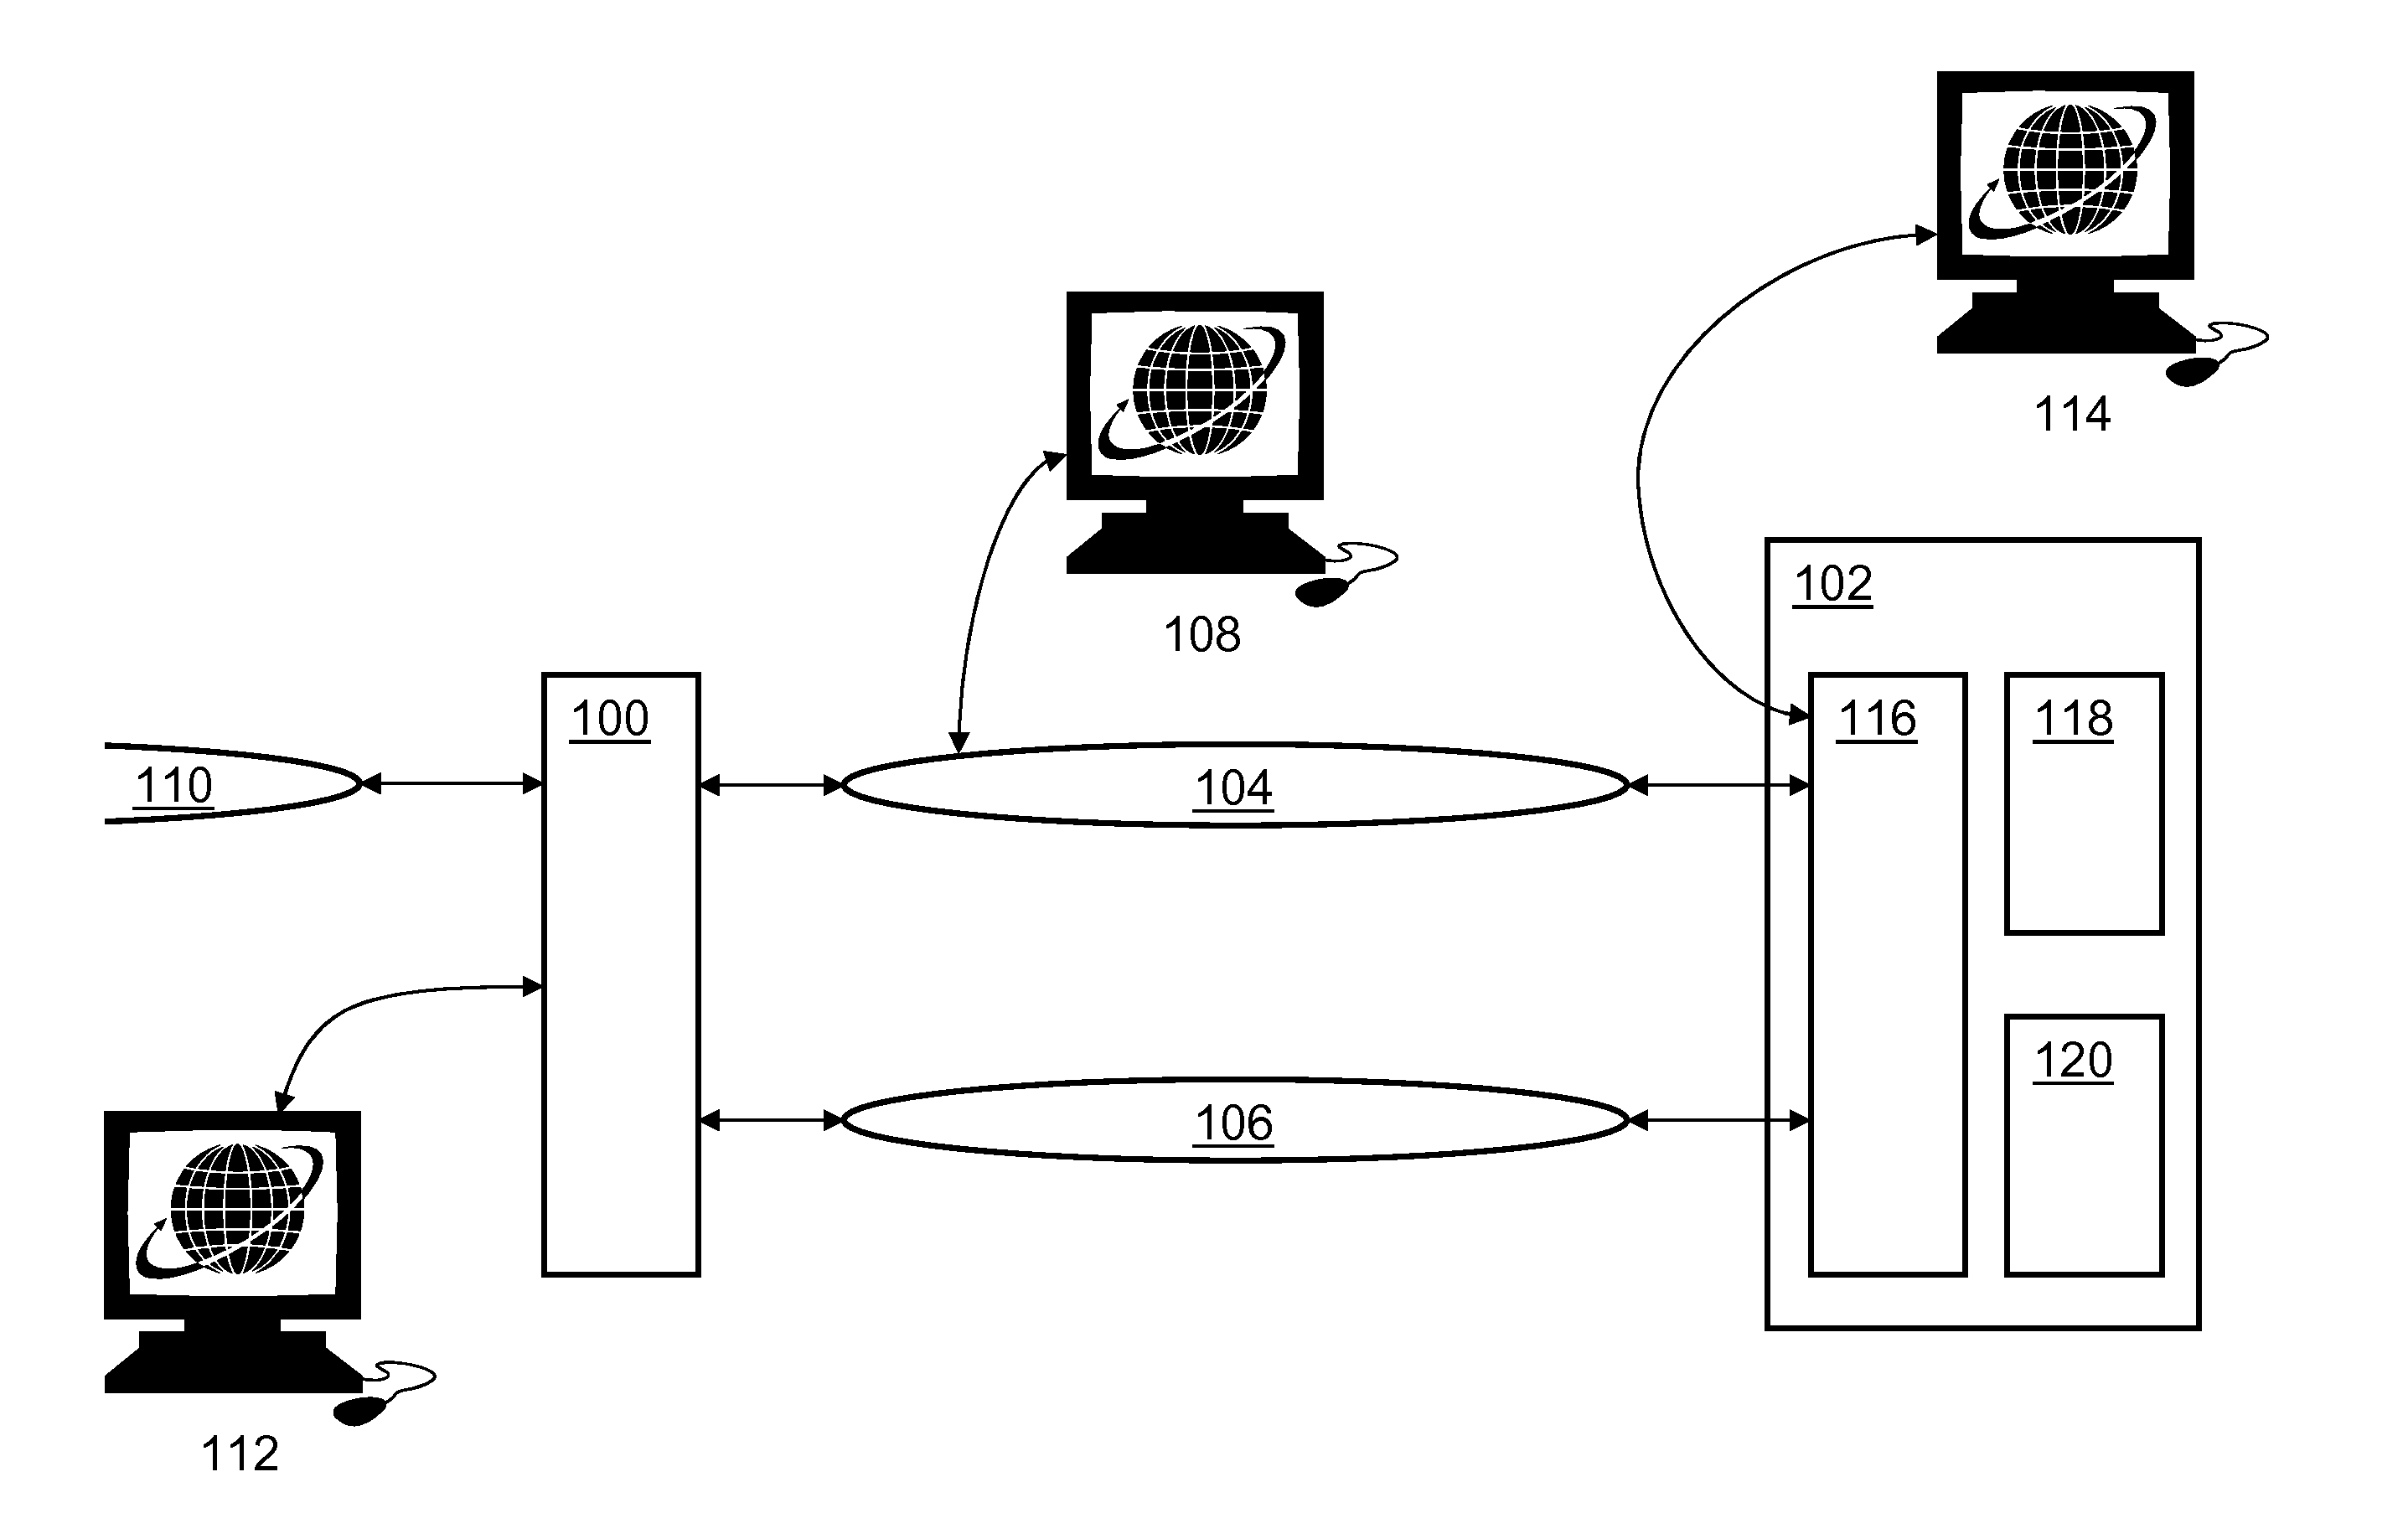 Aggregating ports while allowing access to singleton ports